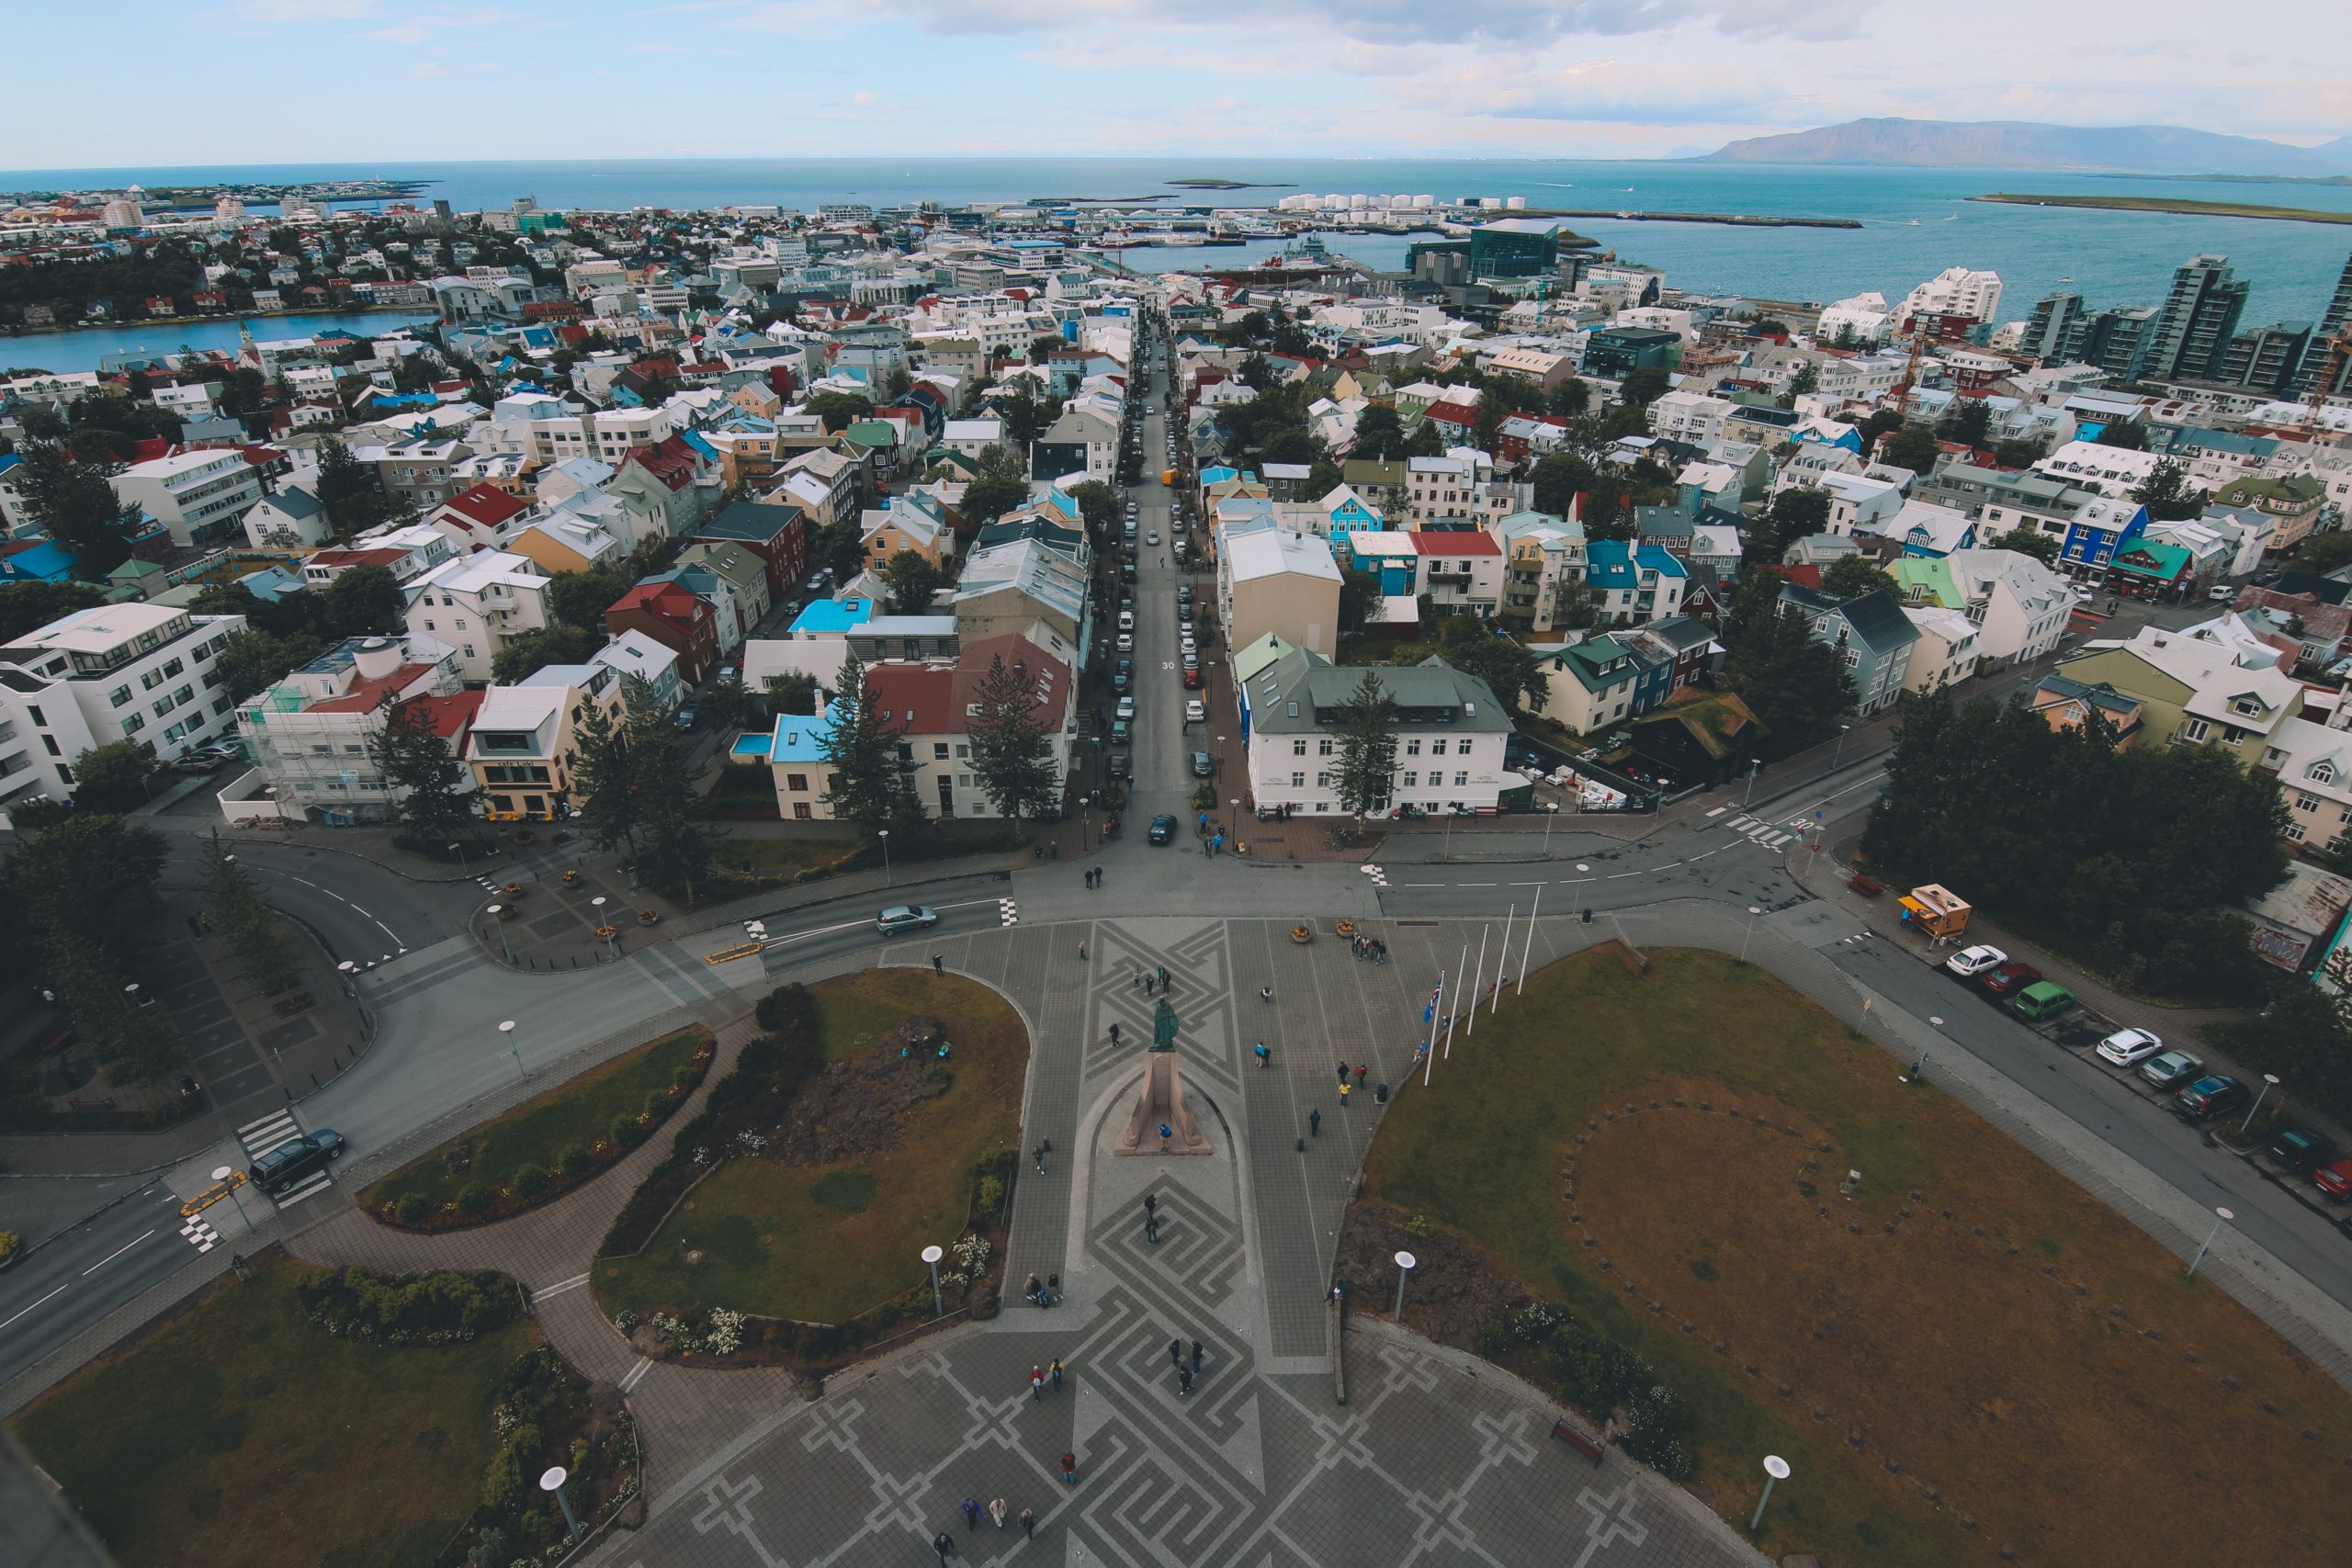 A view overlooking the city of Reykjavík